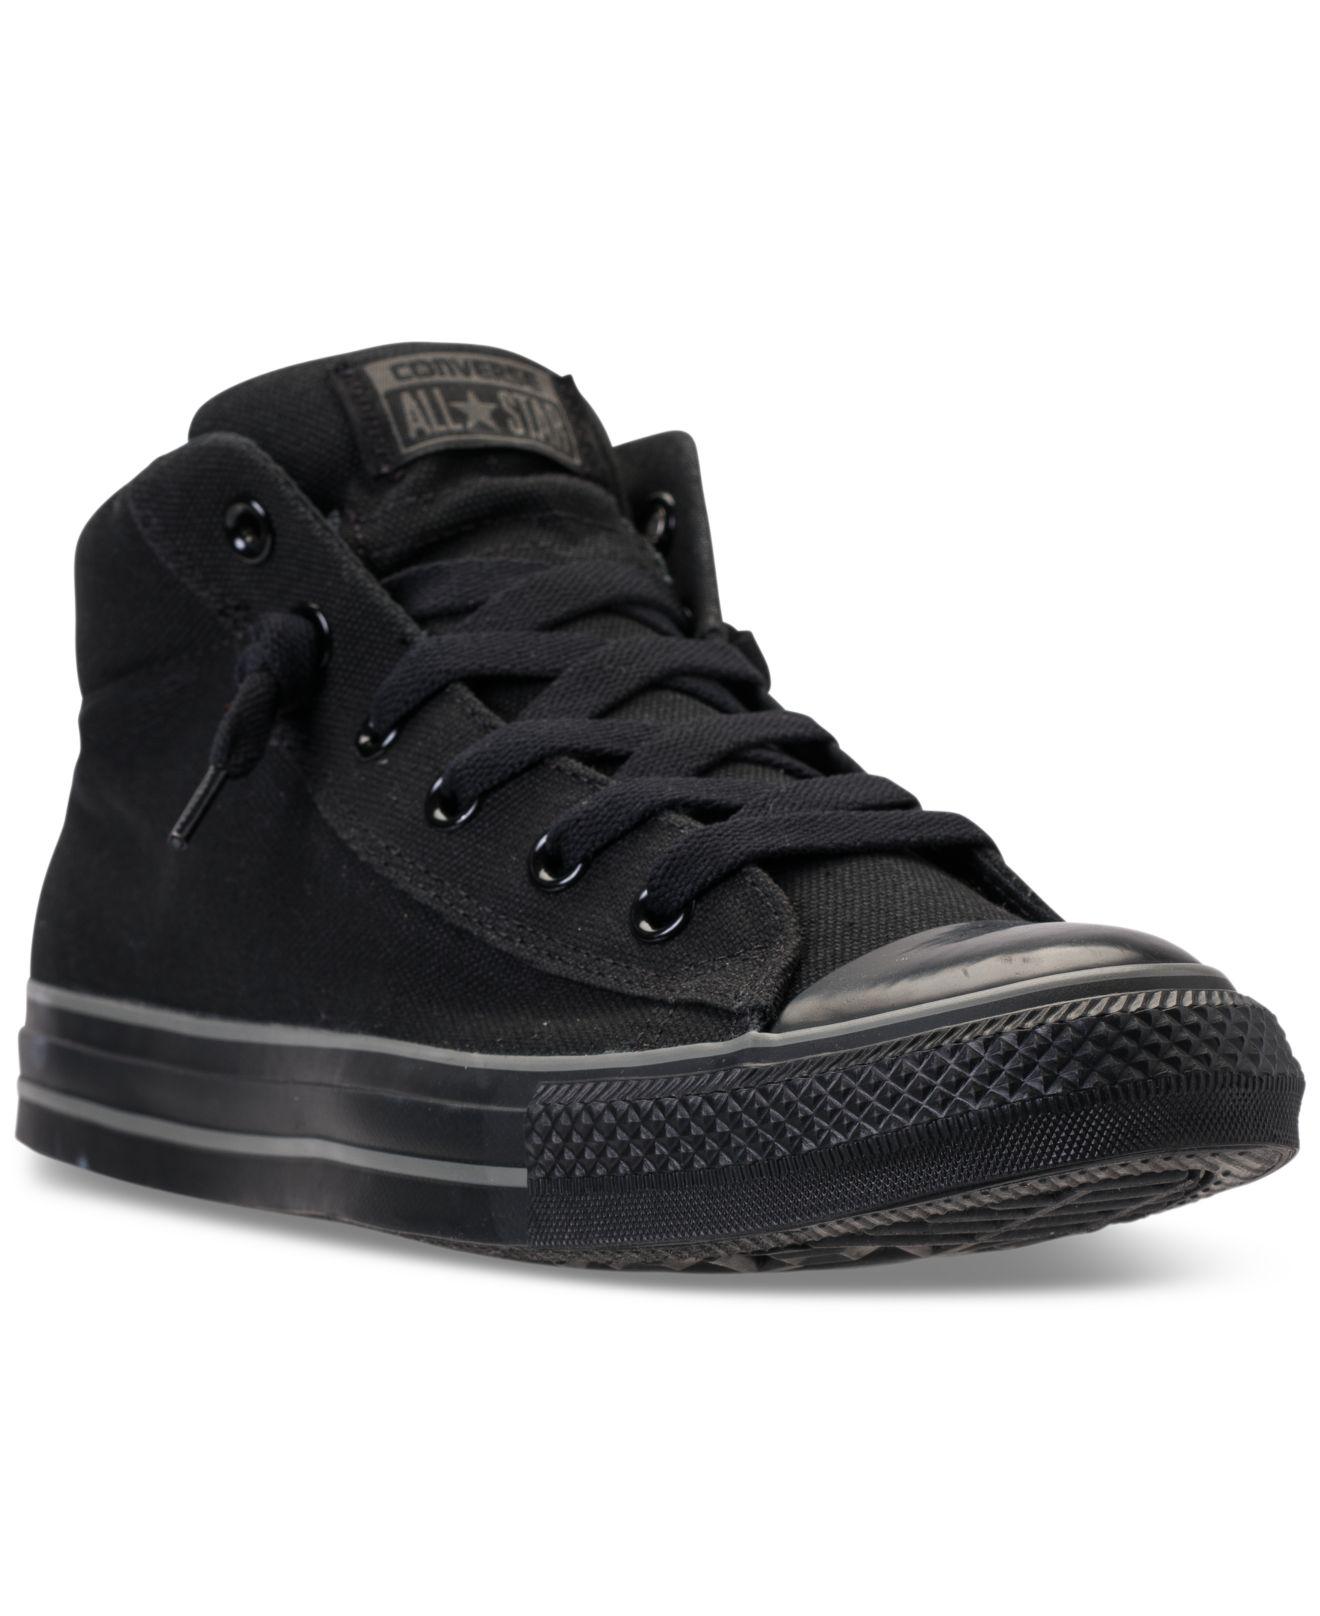 throne Six accident converse grey all star street mid conjunction ...